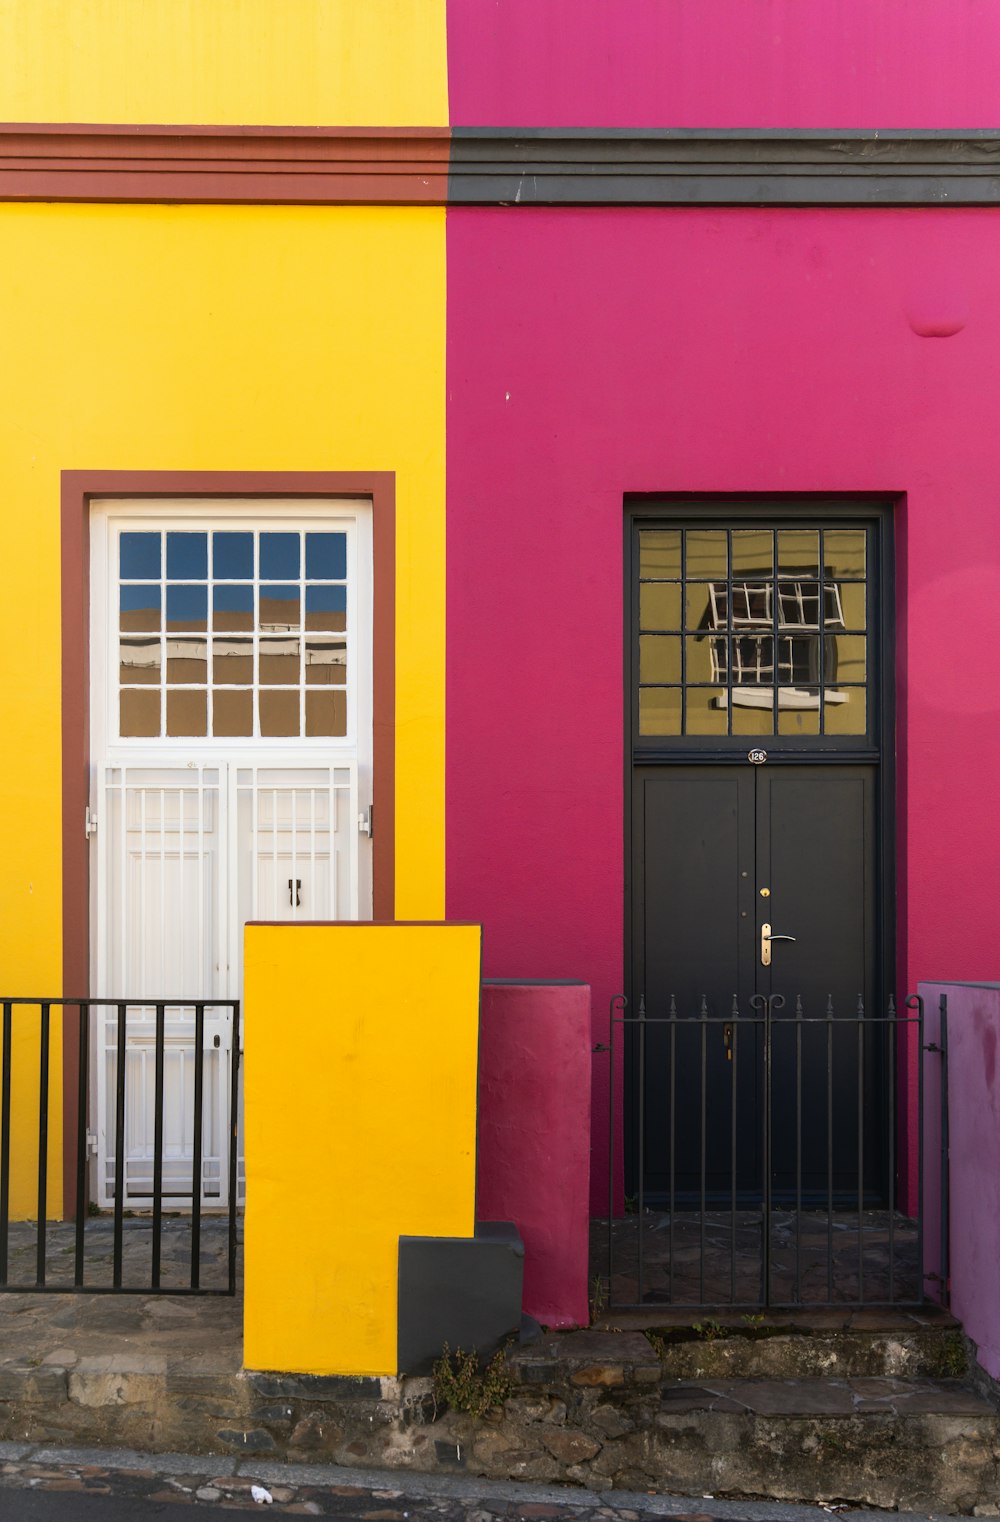 a yellow and pink building with a black gate